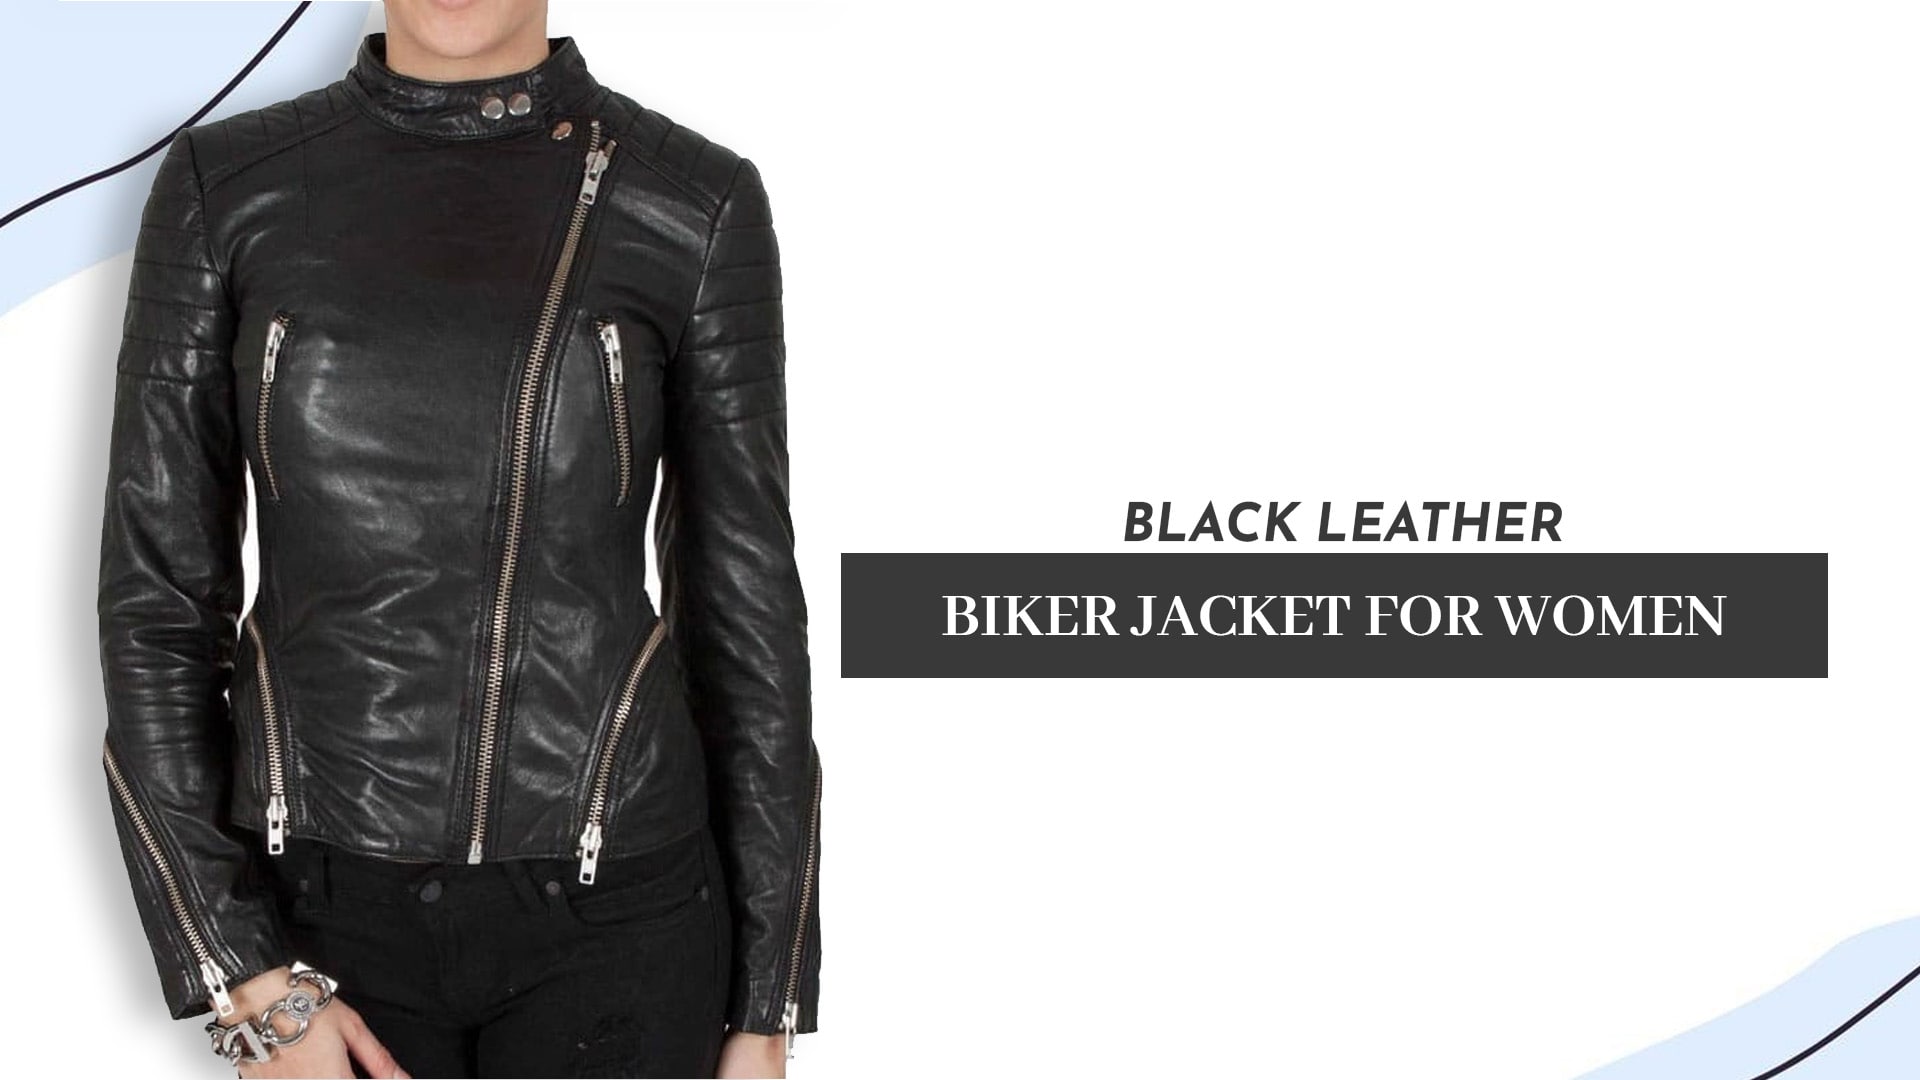 Three Trend Setting Ways To Wear A Leather Jacket For Women 7130